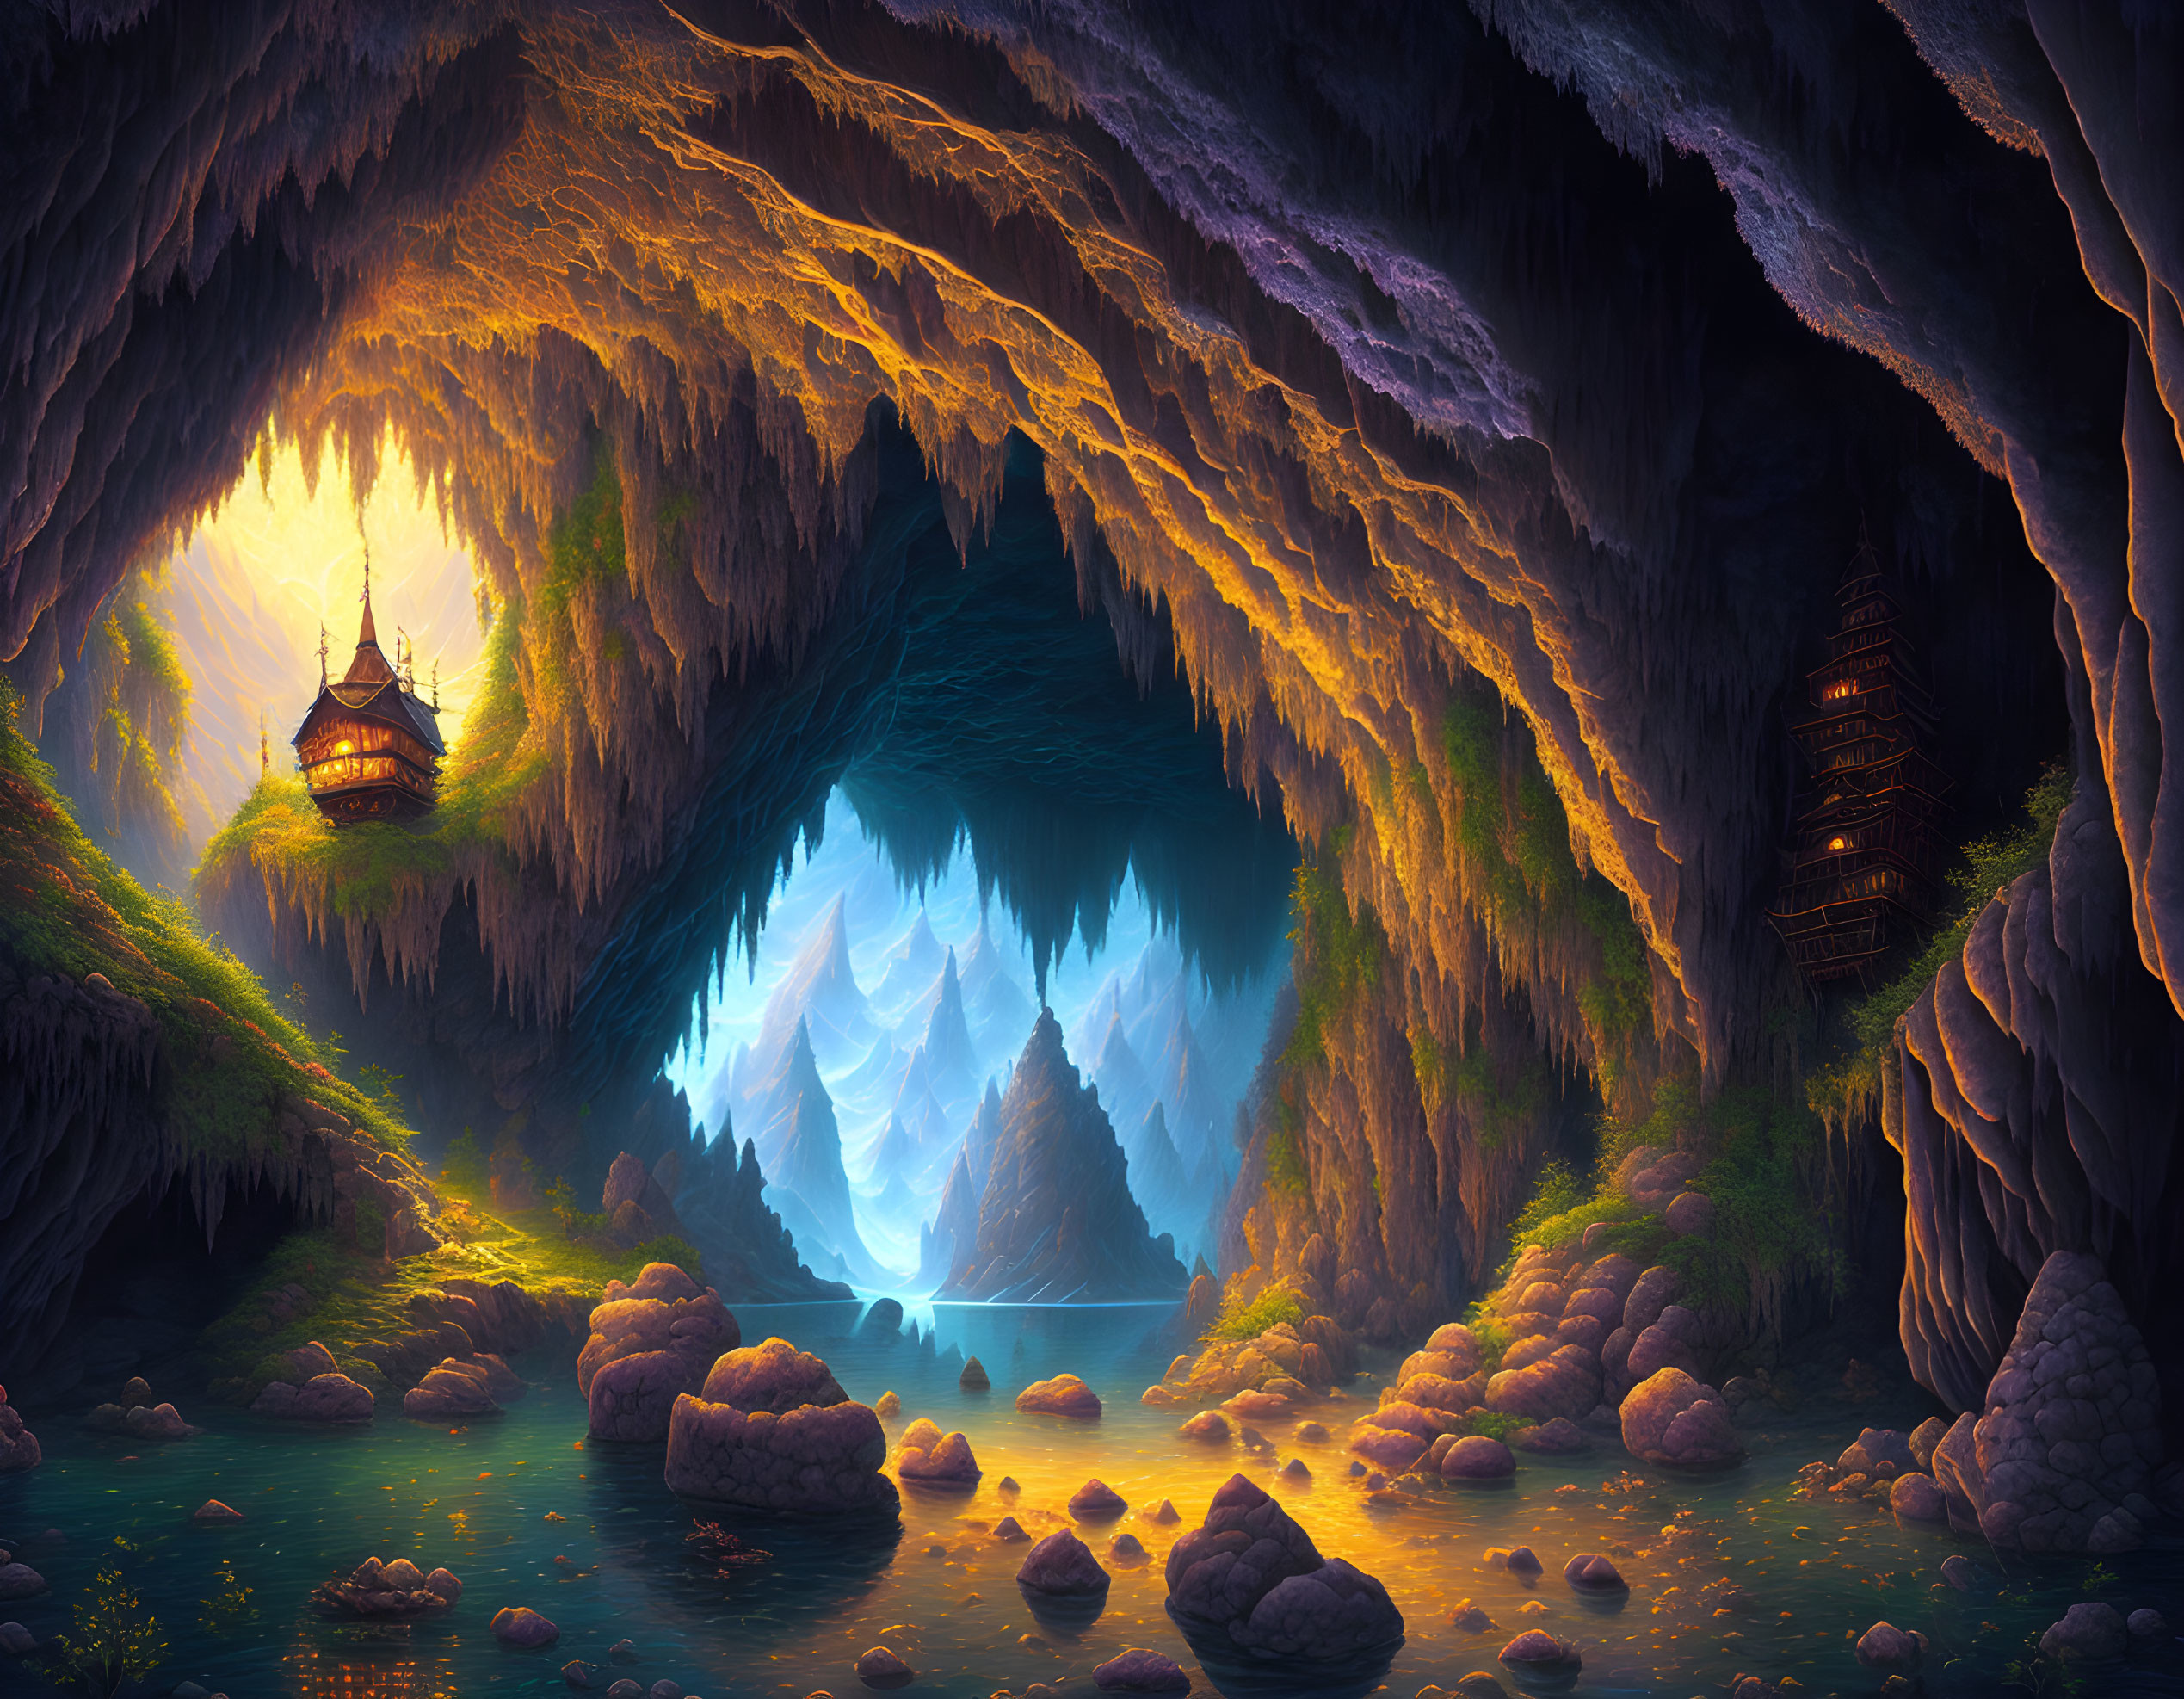 Mystical cave with luminous crystal entrance, stalactites, serene lake & cozy wooden structures